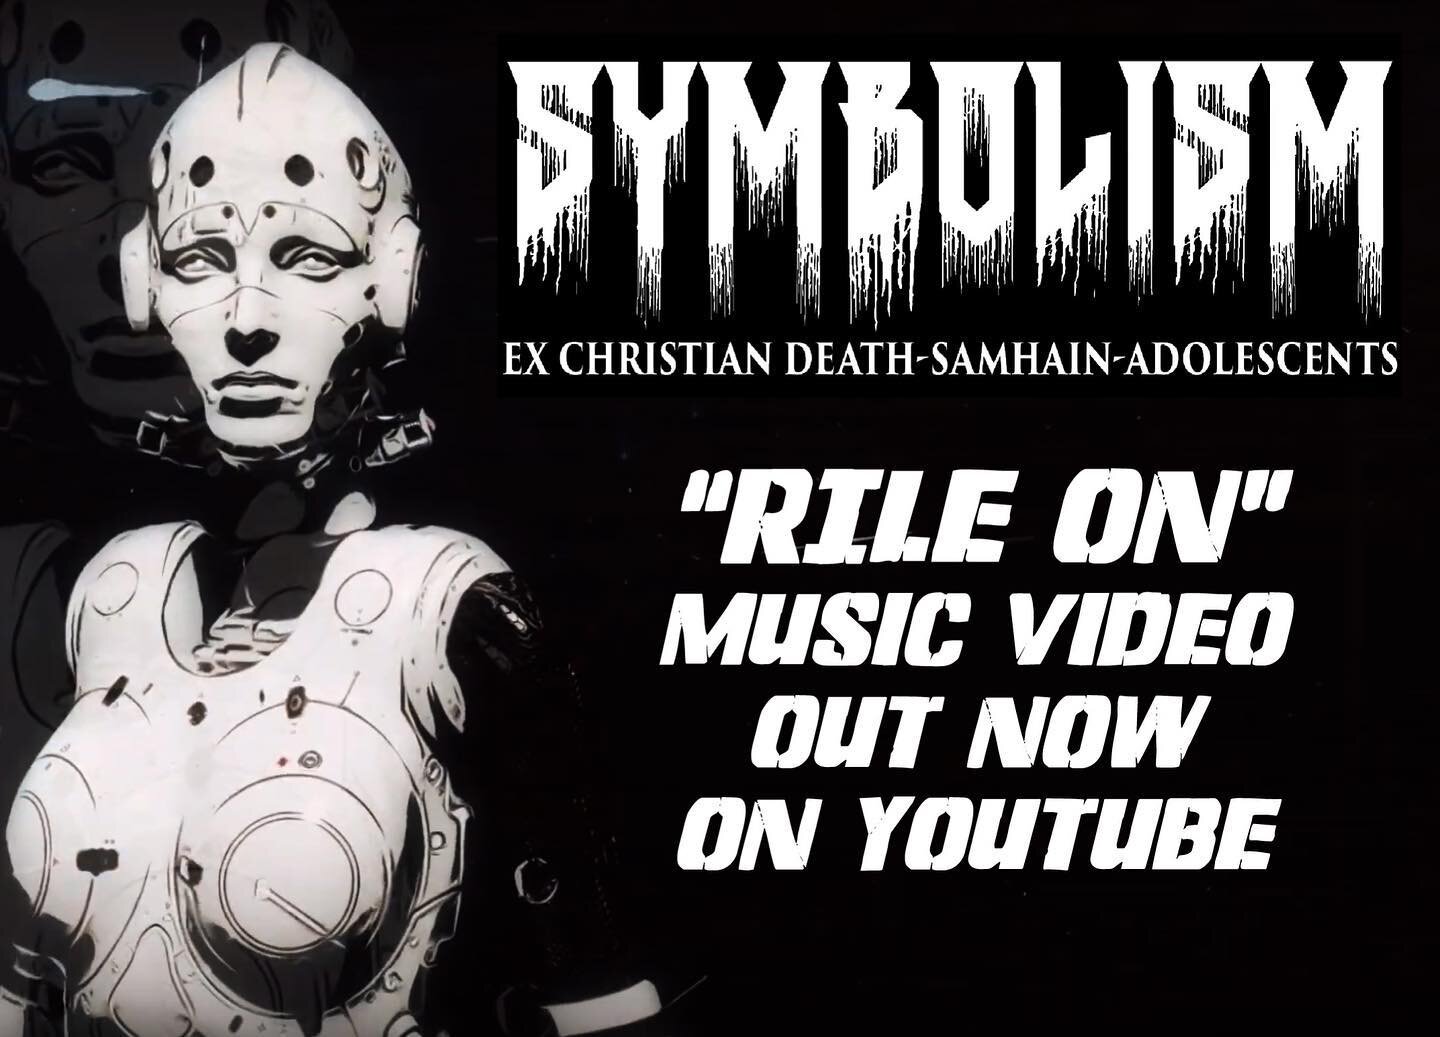 Watch the very first @symbolismband music video!
&ldquo;Rile On&rdquo; streaming NOW on @youtube 
Click link in bio! 
Thanks to @thework67 for her amazing vision and talent! 
#Samhain #ChristianDeath #Adolescents #DI #SymbolismBand
#RileOn #MusicVide